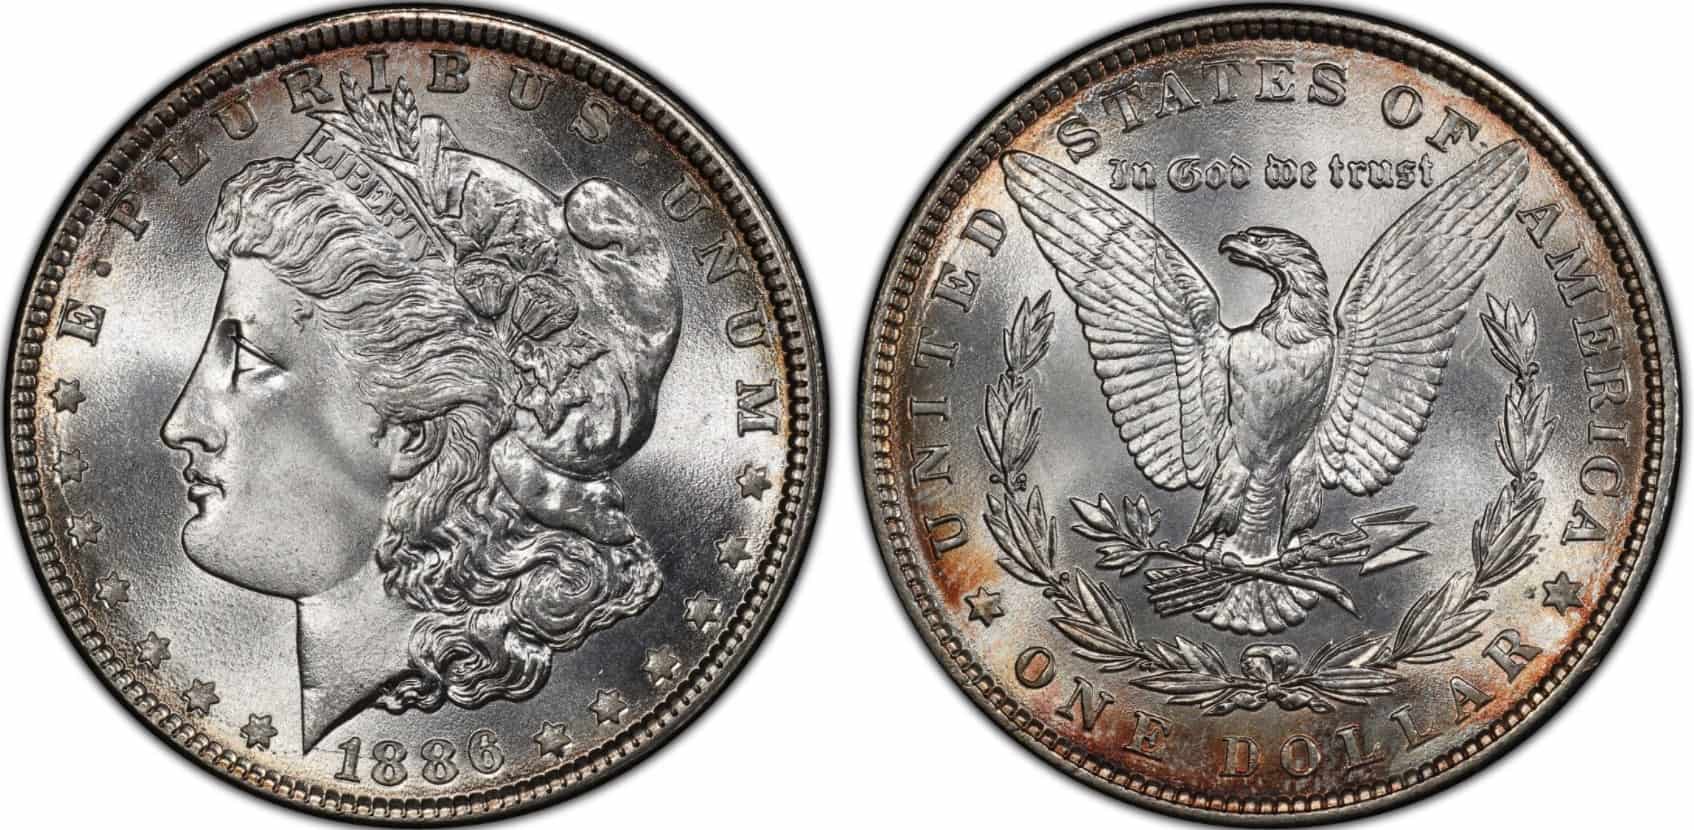 1886 Morgan silver dollar without a mint mark